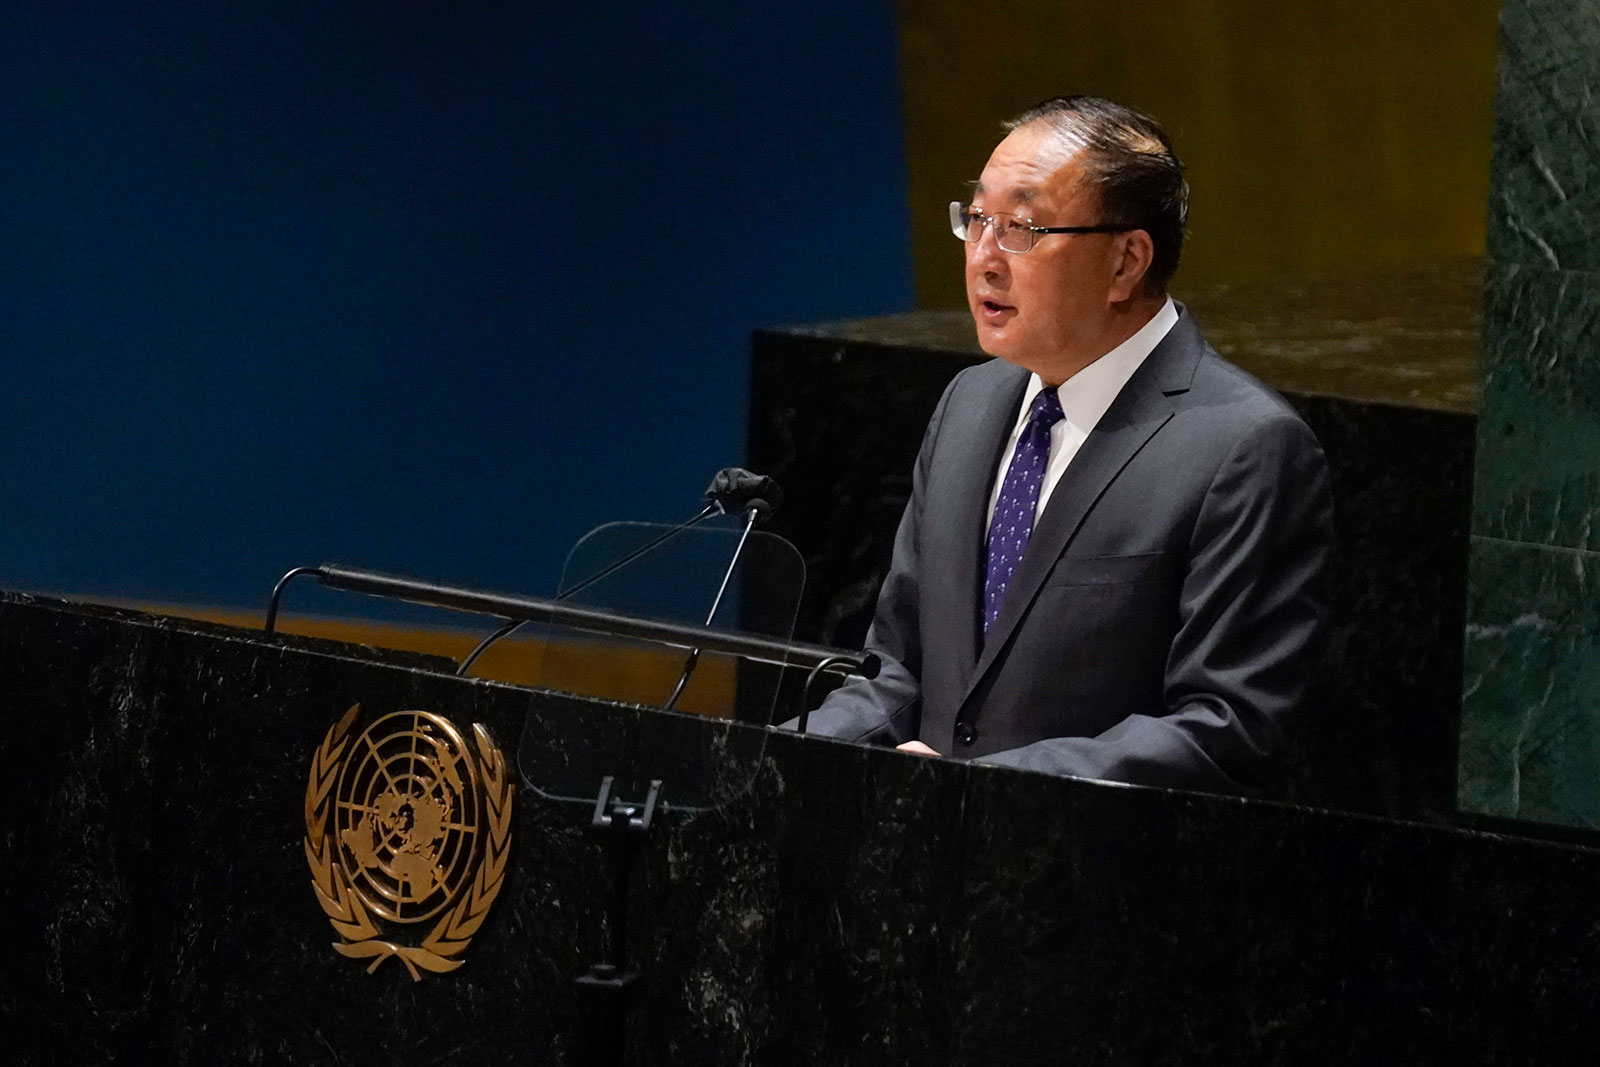 China's United Nations Ambassador Zhang Jun speaks during an emergency session of the General Assembly at the UN headquarters on Thursday.